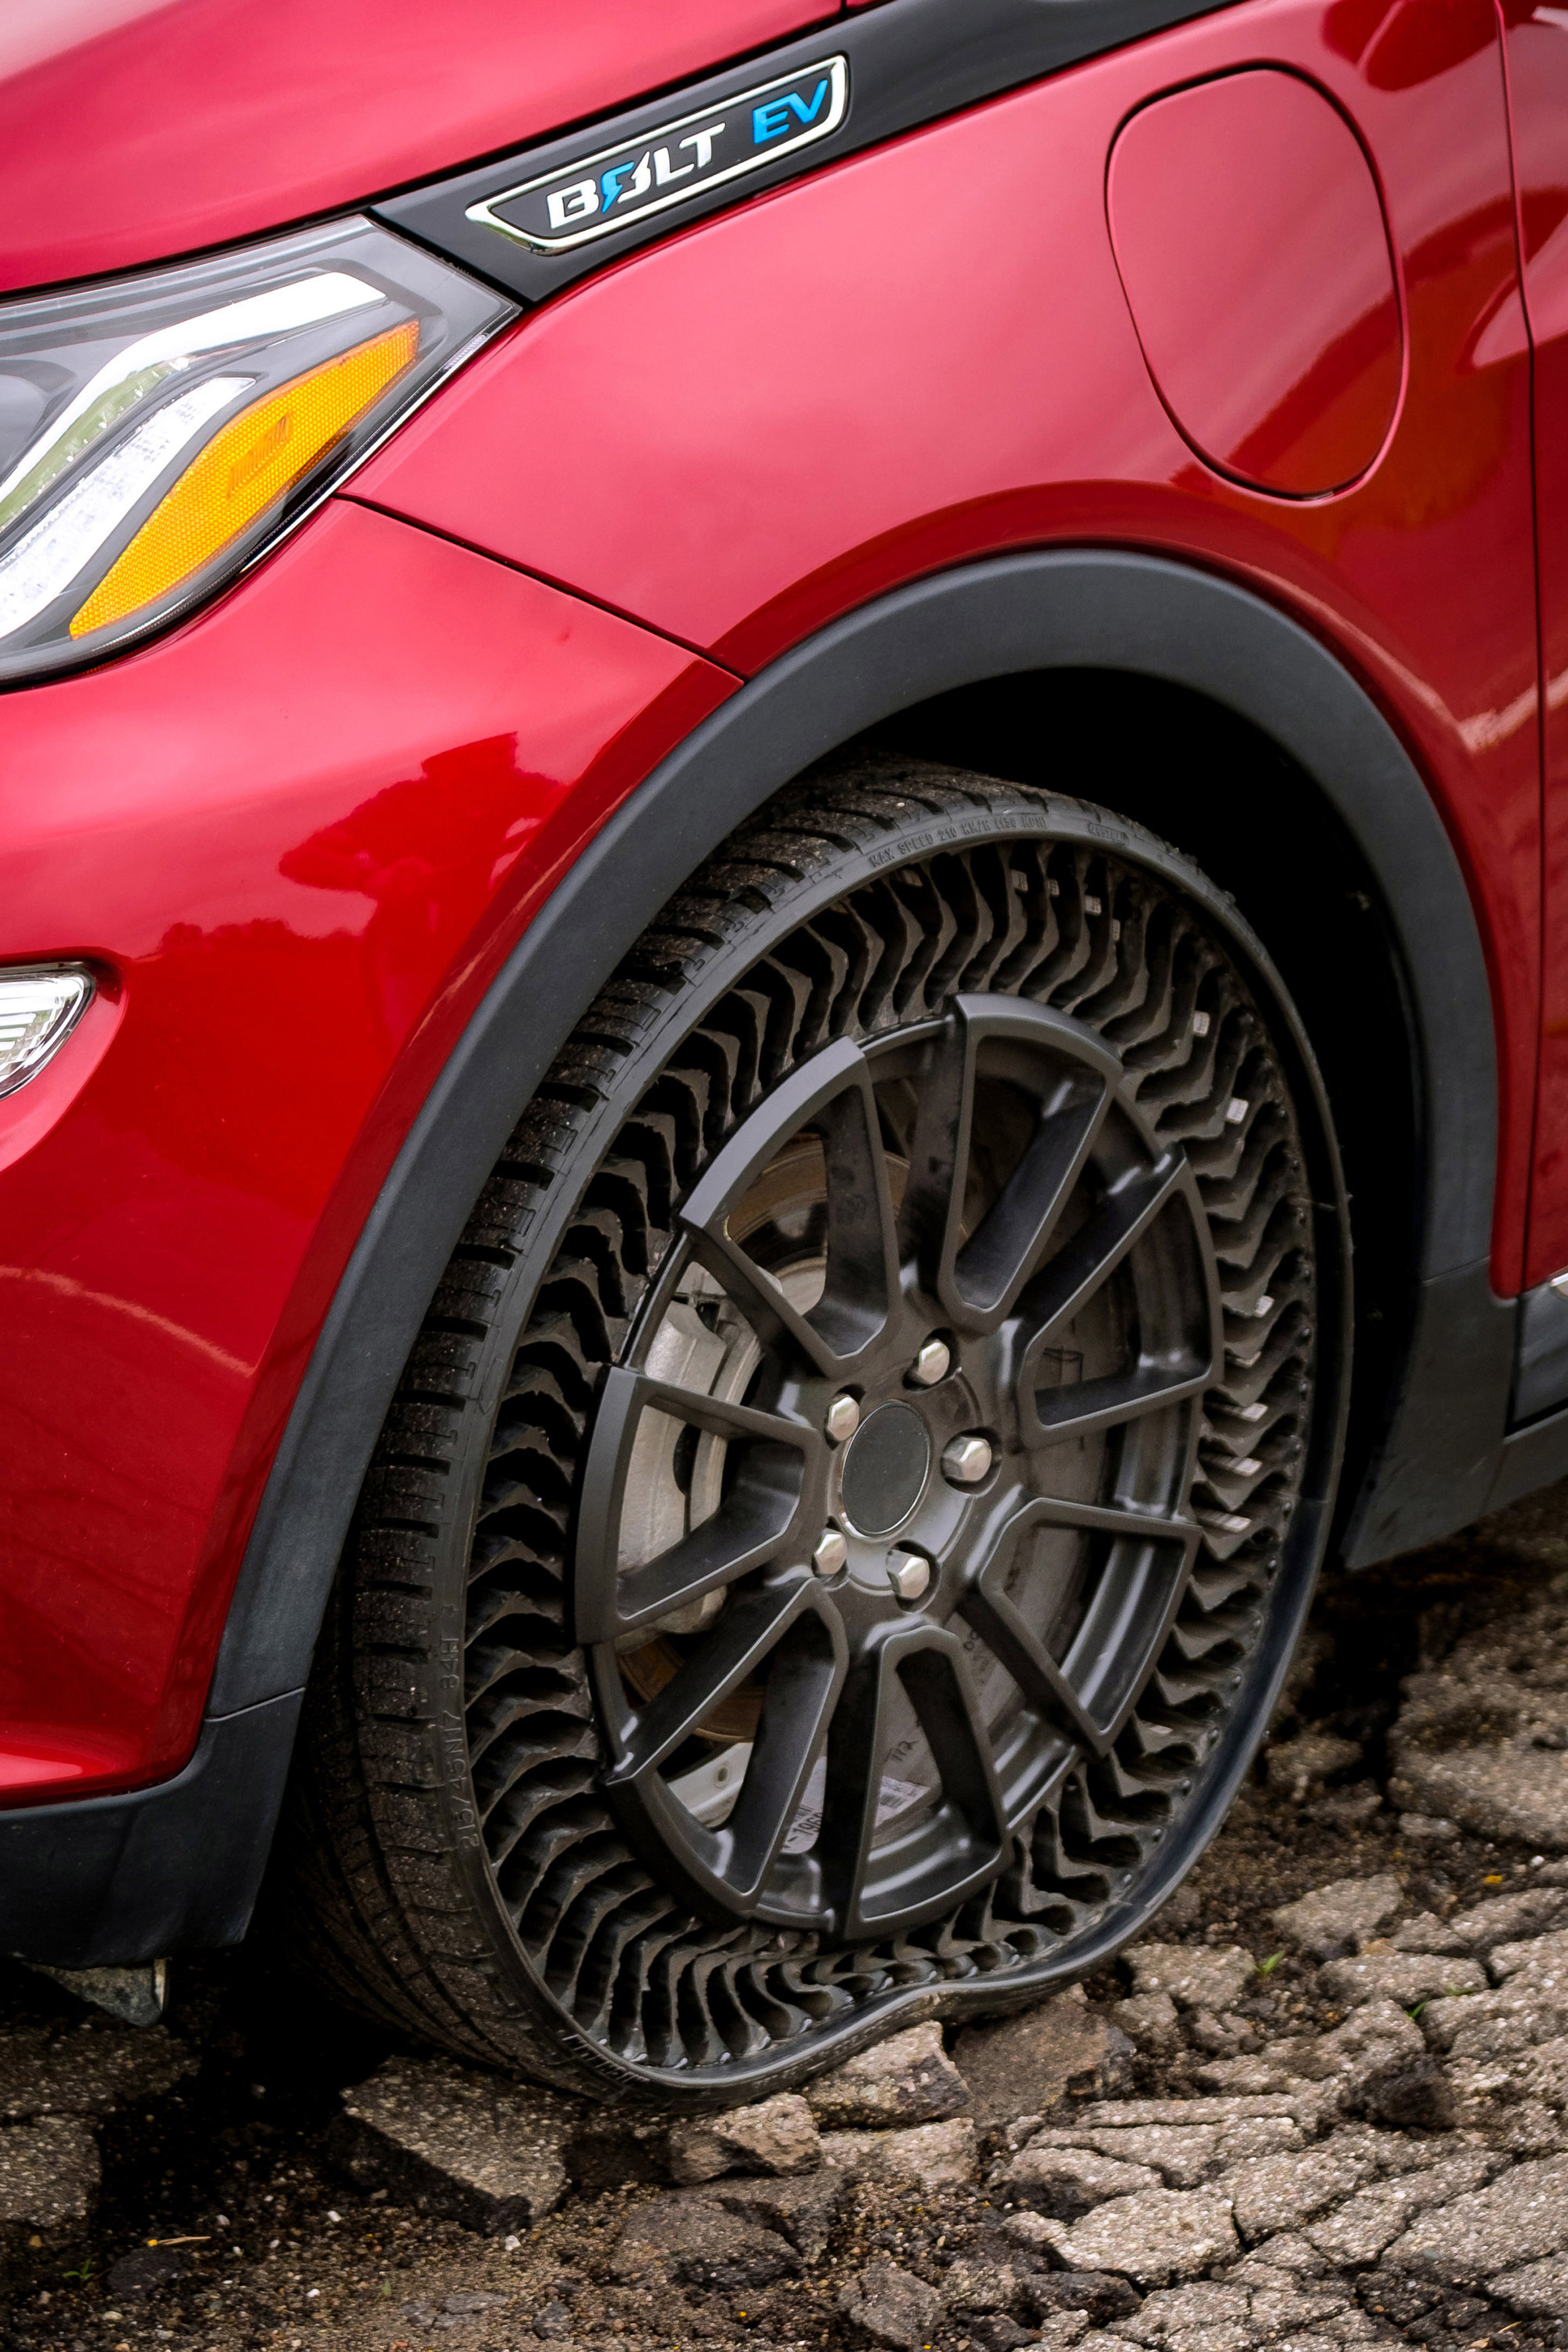 Michelin and GM to bring airless tyres to passenger cars